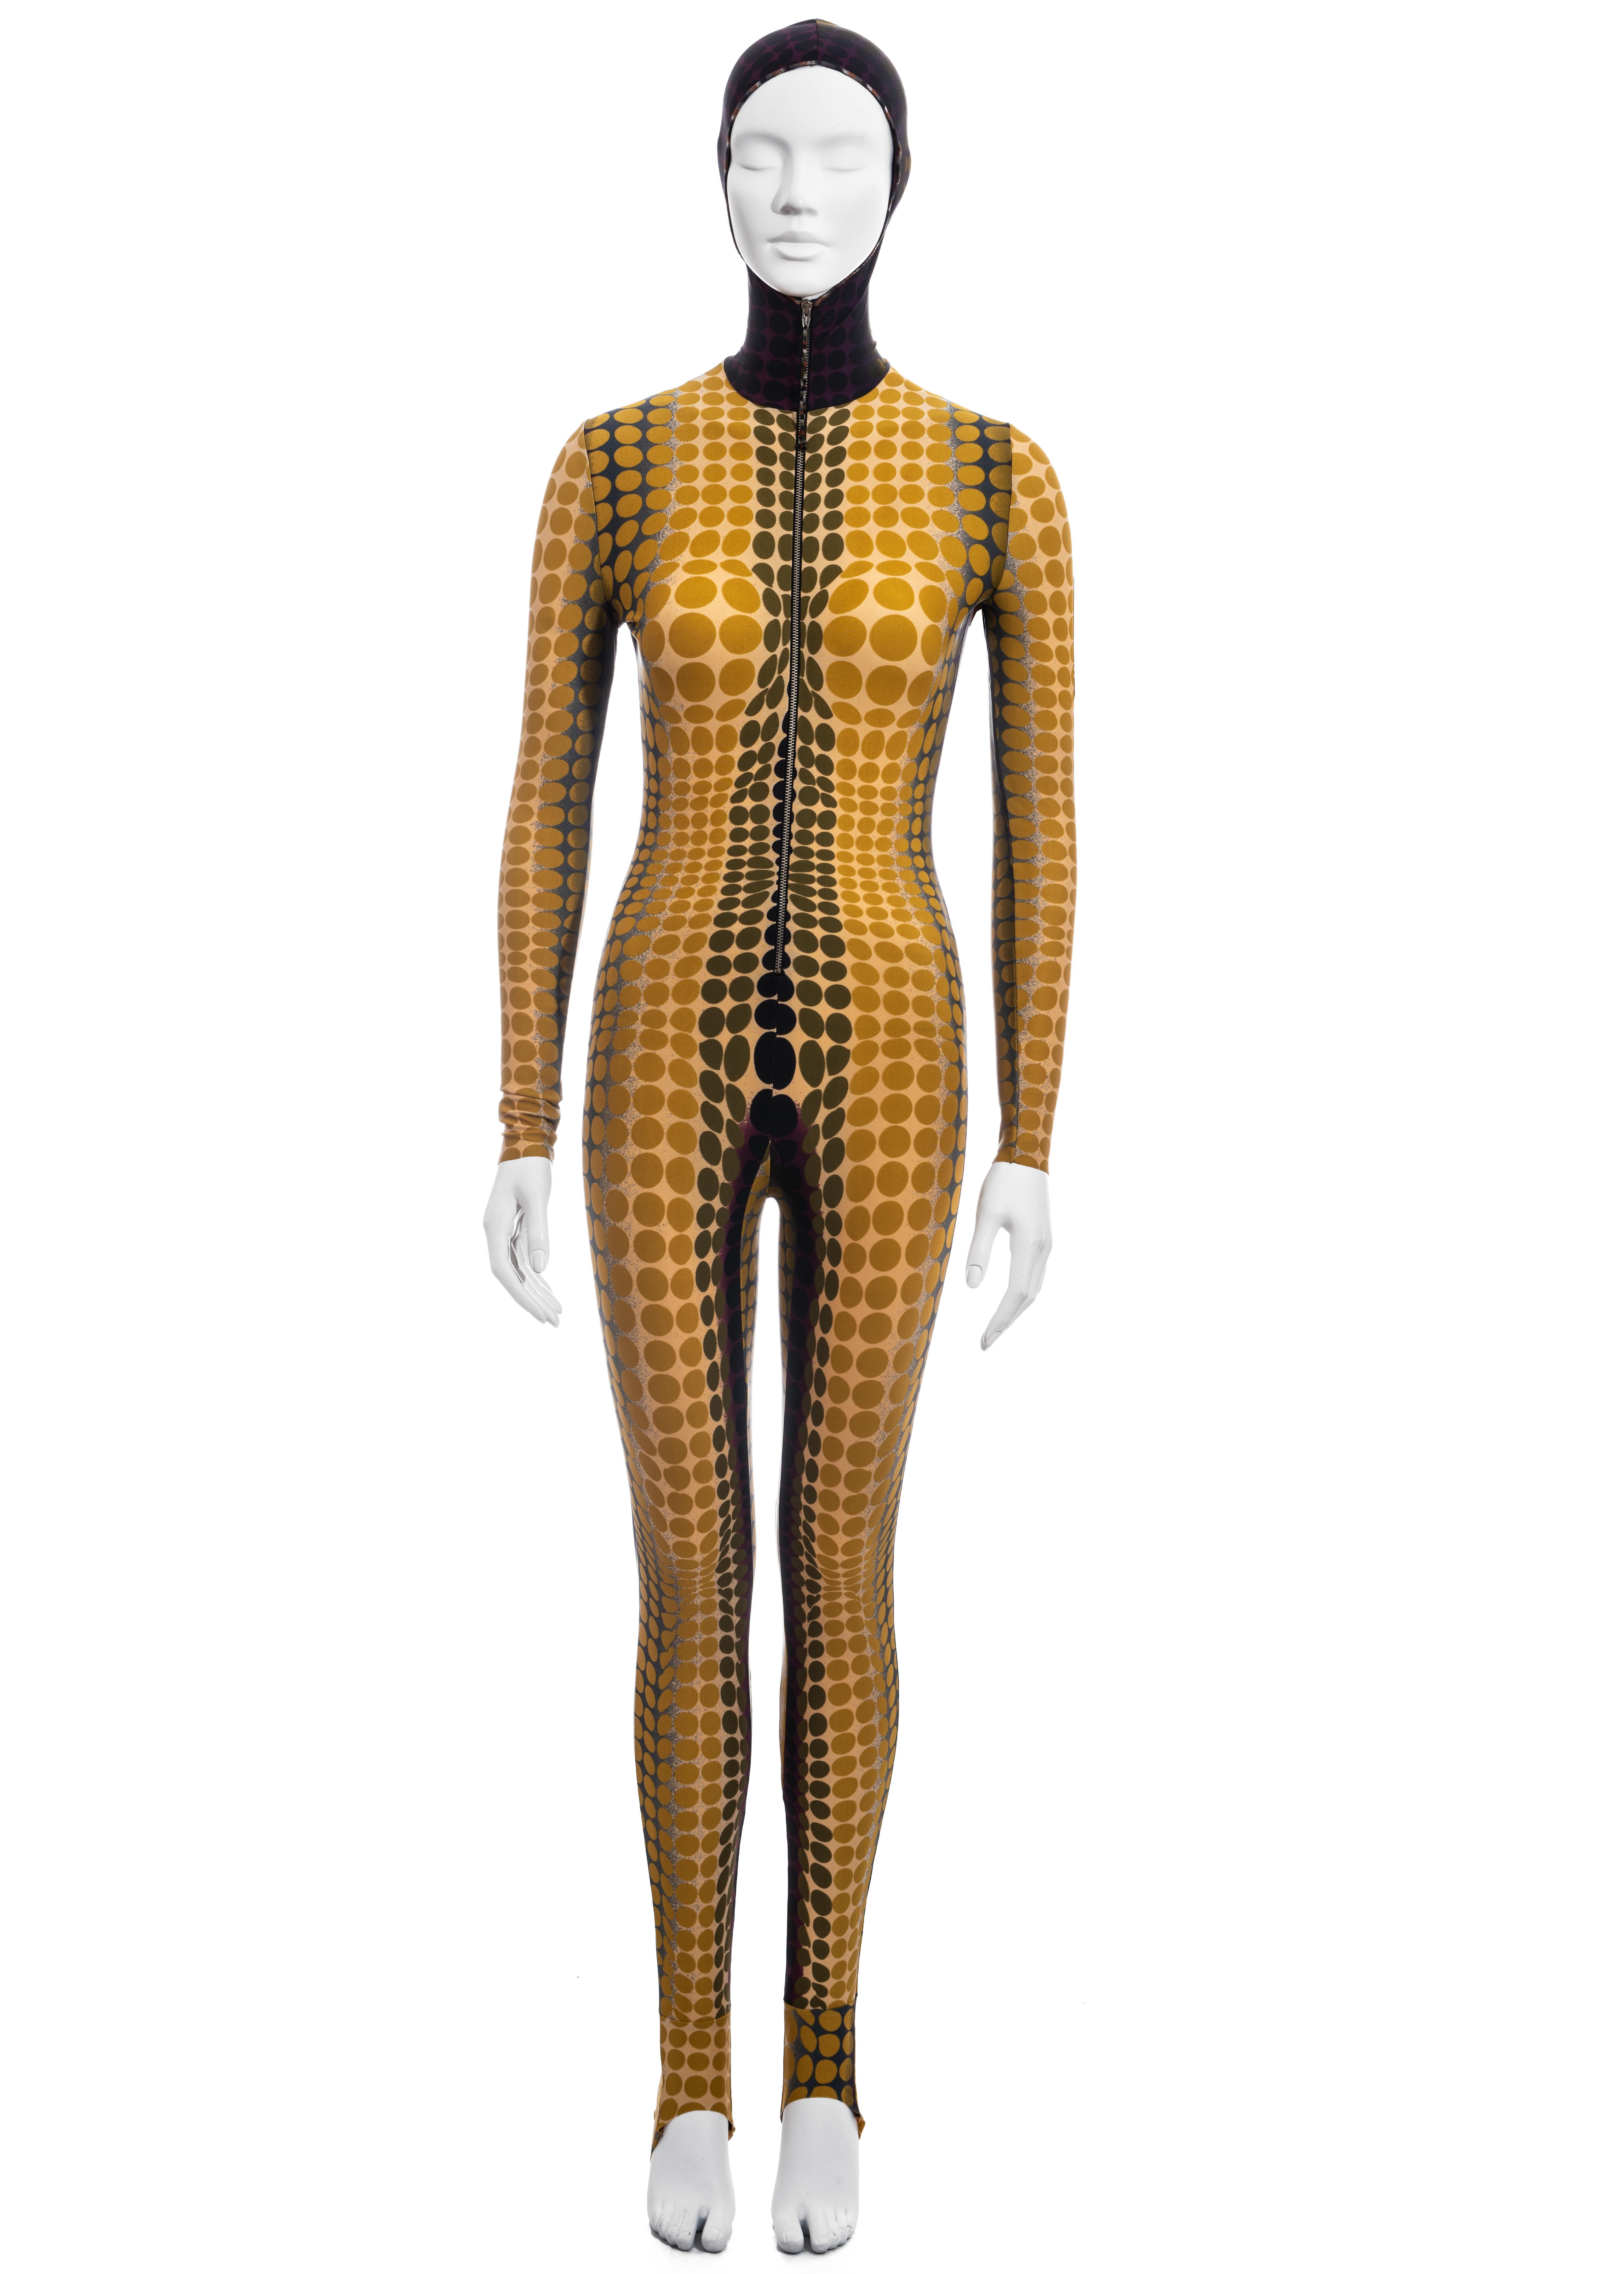 ▪ Jean Paul Gaultier yellow cyber dot catsuit 
▪ 78% Nylon, 22% Spandex
▪ Victor Vasarely inspired print 
▪ Fitted hood
▪ Front zip fastening 
▪ Size Medium
▪ Fall-Winter 1995 